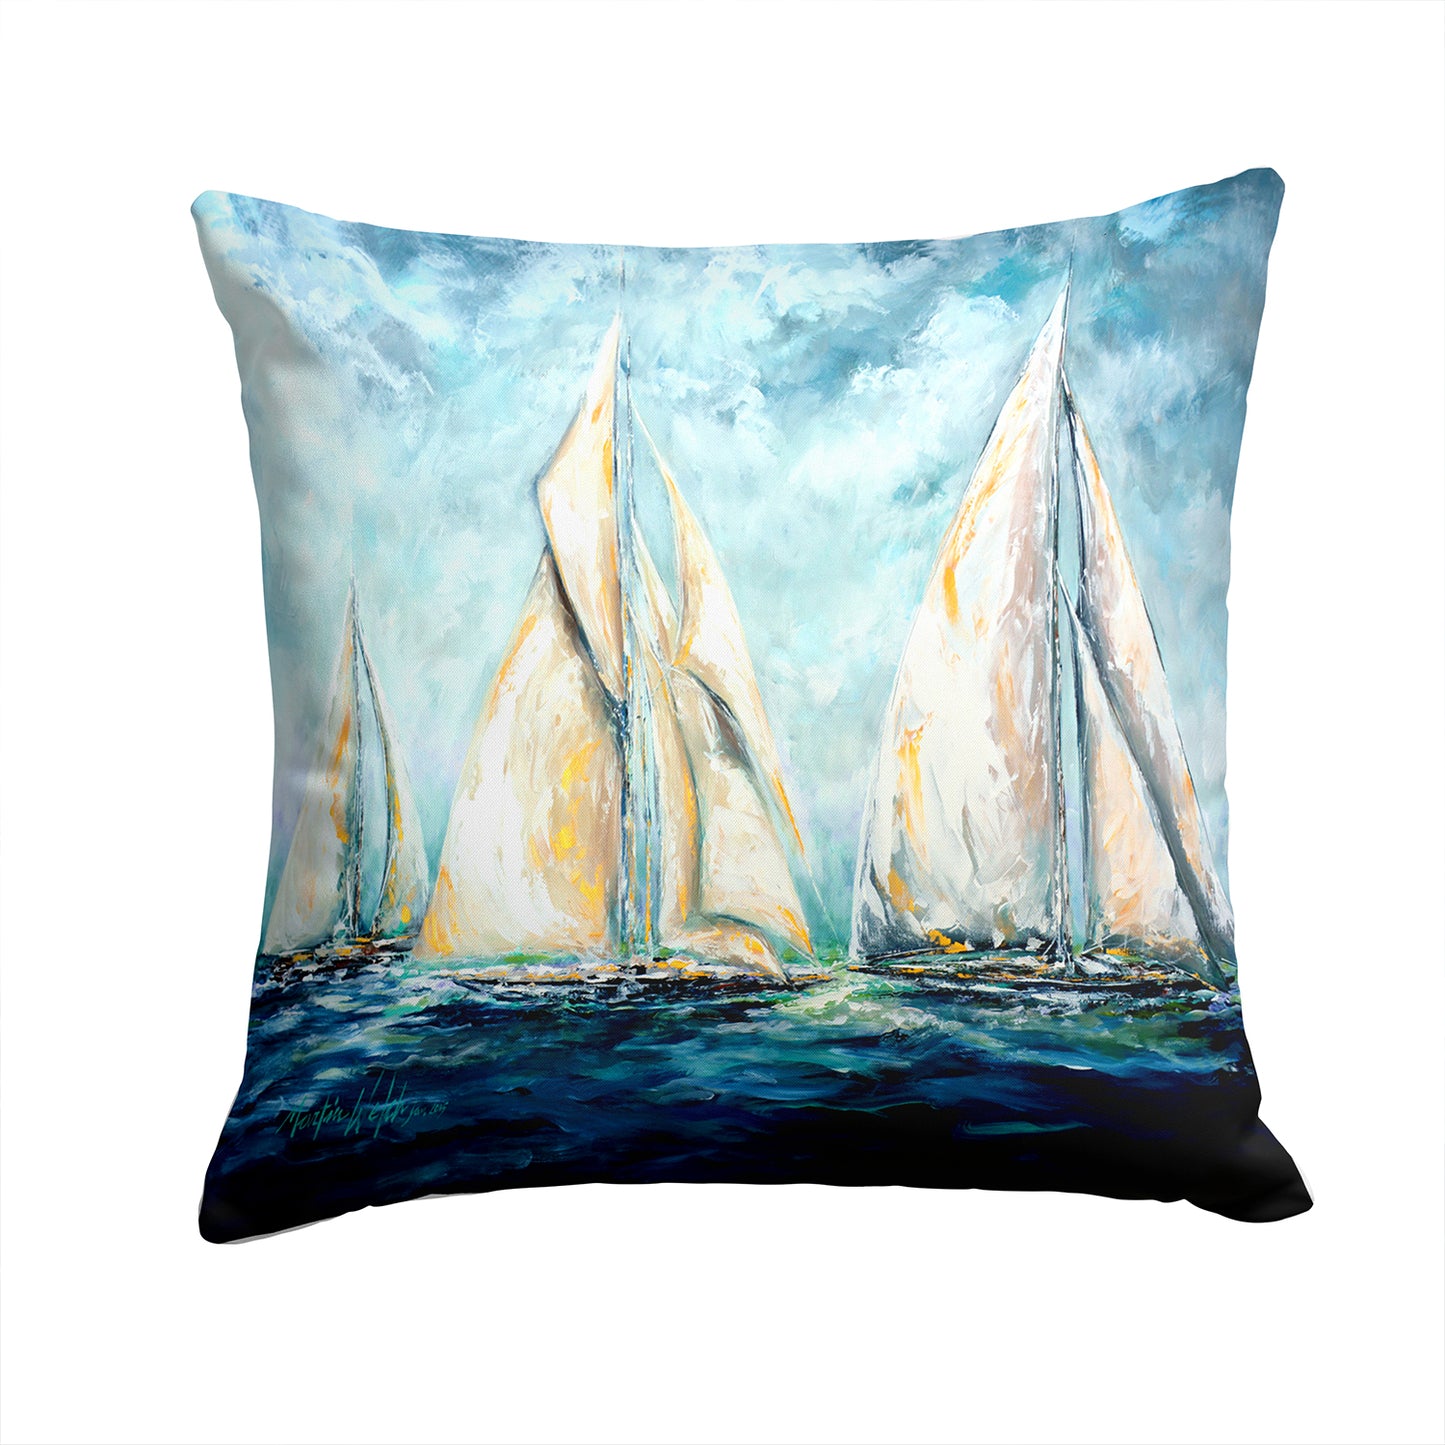 Buy this Sailboats Last Mile Fabric Decorative Pillow